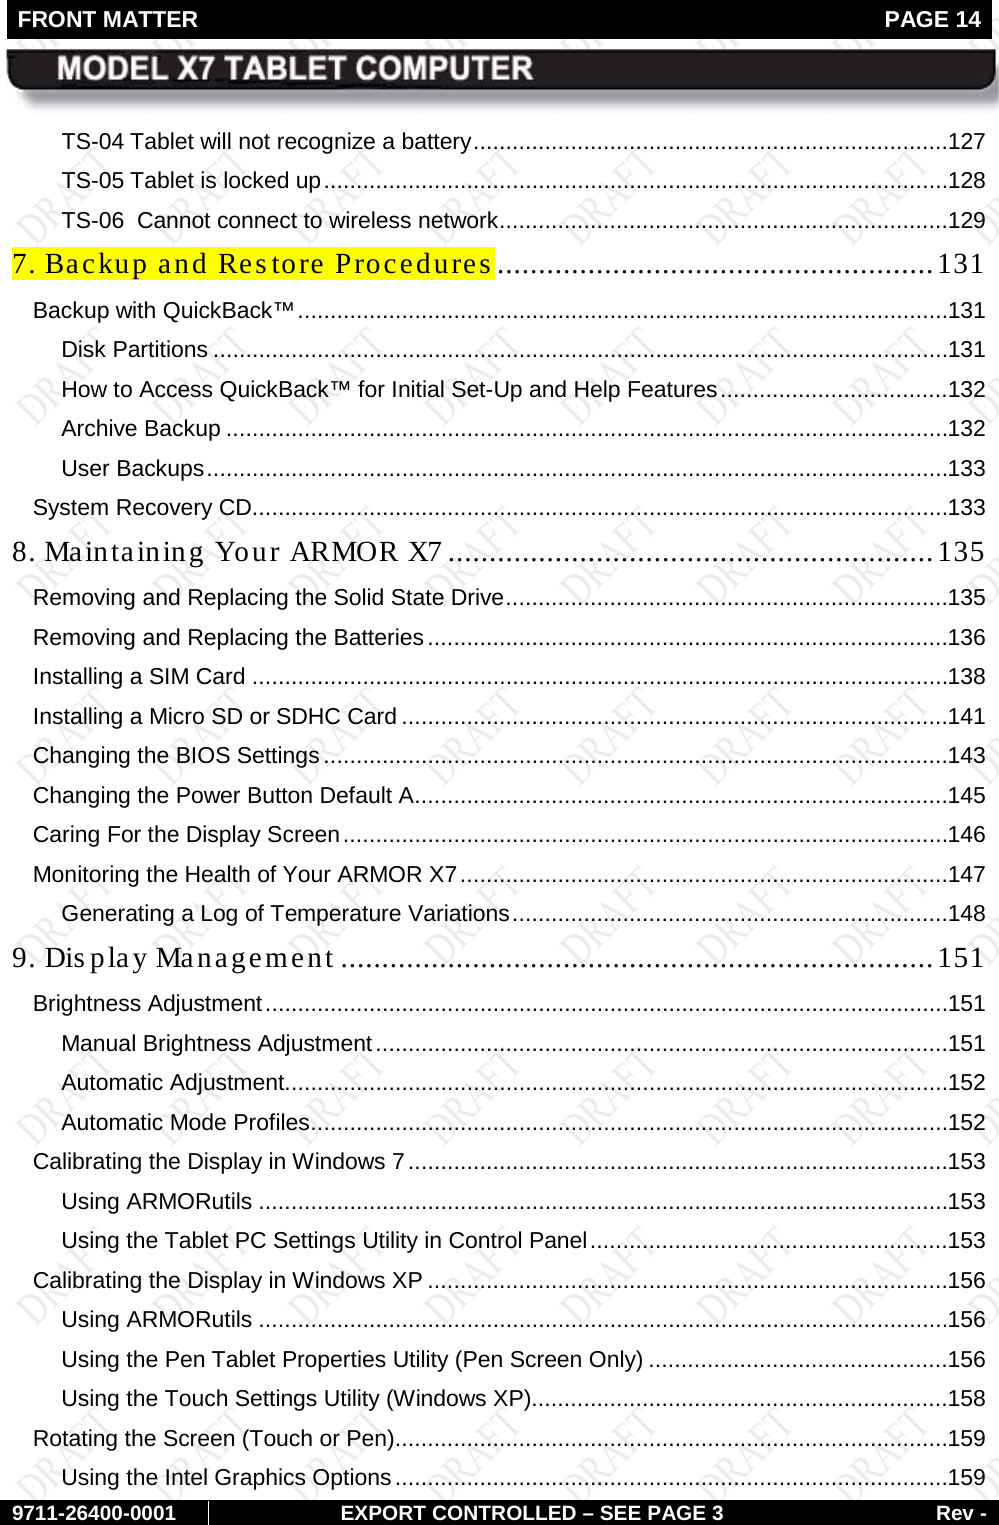 FRONT MATTER   PAGE 14        9711-26400-0001 EXPORT CONTROLLED – SEE PAGE 3 Rev - TS-04 Tablet will not recognize a battery ......................................................................... 127 TS-05 Tablet is locked up ................................................................................................ 128 TS-06  Cannot connect to wireless network ..................................................................... 129 7. Backup and Restore Procedures ..................................................... 131 Backup with QuickBack™ .................................................................................................... 131 Disk Partitions ................................................................................................................. 131 How to Access QuickBack™ for Initial Set-Up and Help Features ................................... 132 Archive Backup ............................................................................................................... 132 User Backups .................................................................................................................. 133 System Recovery CD........................................................................................................... 133 8. Maintaining Your ARMOR X7 ........................................................... 135 Removing and Replacing the Solid State Drive .................................................................... 135 Removing and Replacing the Batteries ................................................................................ 136 Installing a SIM Card ........................................................................................................... 138 Installing a Micro SD or SDHC Card .................................................................................... 141 Changing the BIOS Settings ................................................................................................ 143 Changing the Power Button Default A .................................................................................. 145 Caring For the Display Screen ............................................................................................. 146 Monitoring the Health of Your ARMOR X7 ........................................................................... 147 Generating a Log of Temperature Variations ................................................................... 148 9. Display Management ........................................................................ 151 Brightness Adjustment ......................................................................................................... 151 Manual Brightness Adjustment ........................................................................................ 151 Automatic Adjustment...................................................................................................... 152 Automatic Mode Profiles .................................................................................................. 152 Calibrating the Display in Windows 7 ................................................................................... 153 Using ARMORutils .......................................................................................................... 153 Using the Tablet PC Settings Utility in Control Panel ....................................................... 153 Calibrating the Display in Windows XP ................................................................................ 156 Using ARMORutils .......................................................................................................... 156 Using the Pen Tablet Properties Utility (Pen Screen Only) .............................................. 156 Using the Touch Settings Utility (Windows XP)................................................................ 158 Rotating the Screen (Touch or Pen) ..................................................................................... 159 Using the Intel Graphics Options ..................................................................................... 159 